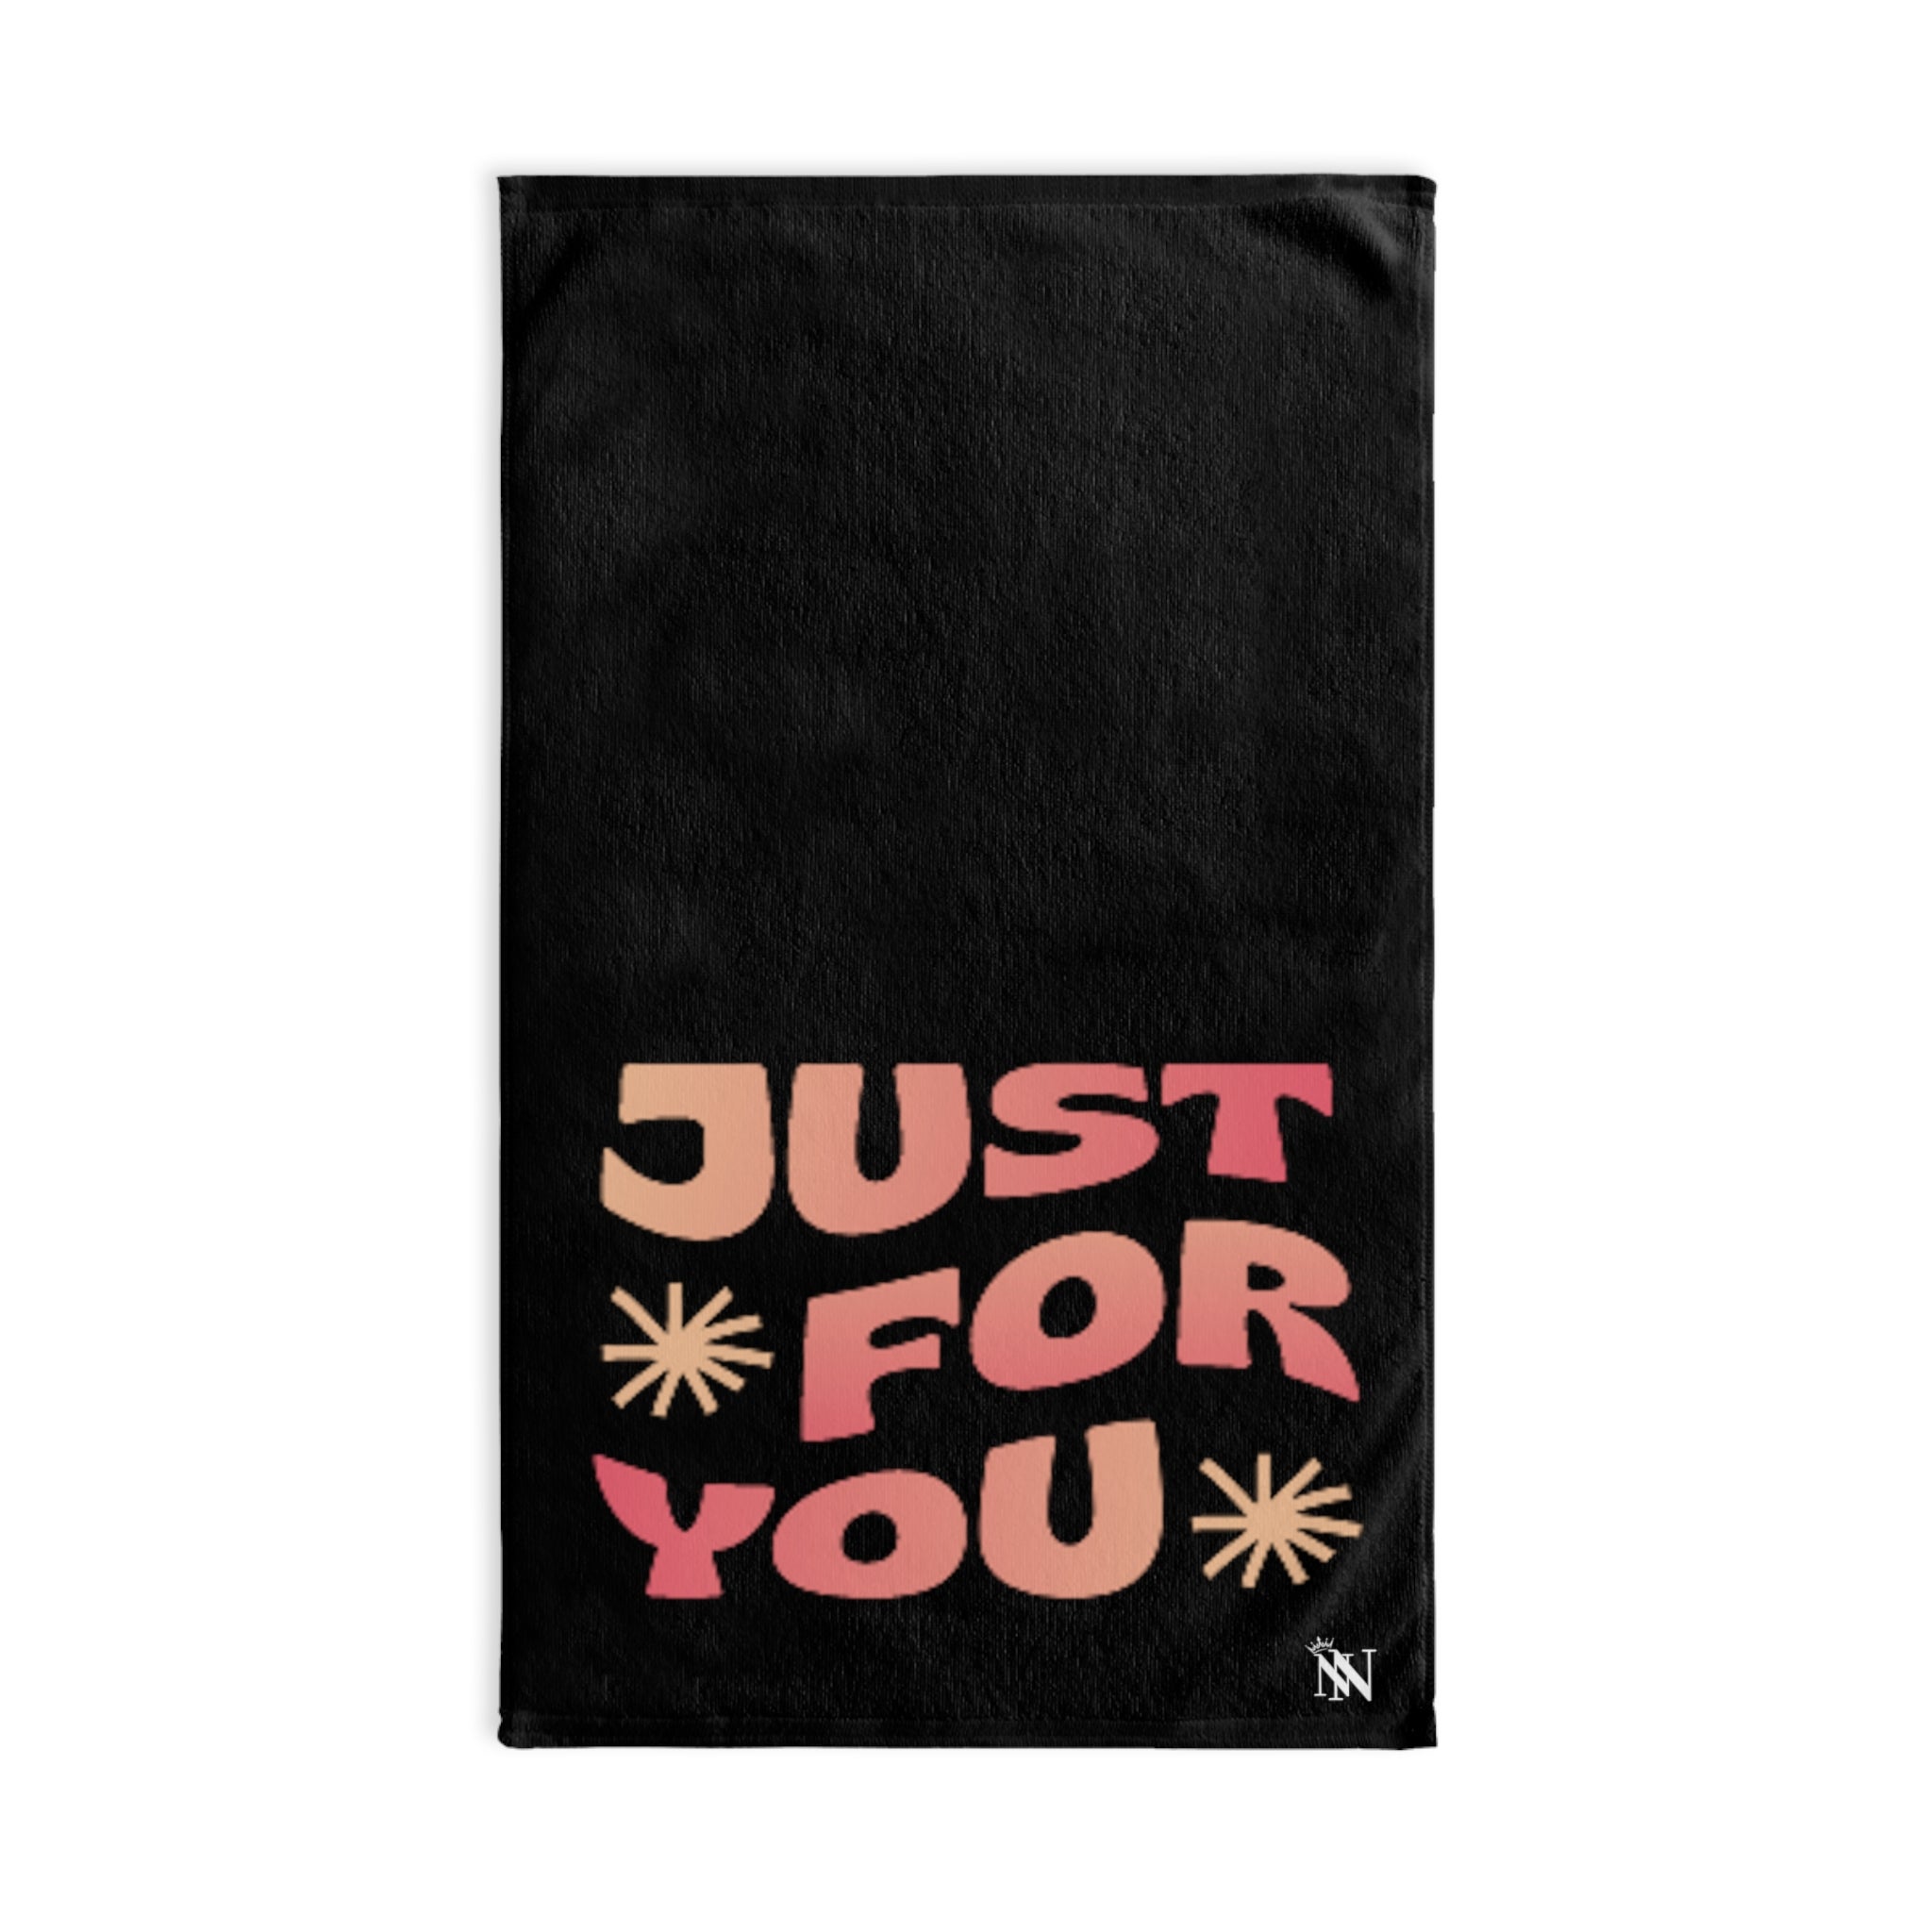 Just For You Black | Sexy Gifts for Boyfriend, Funny Towel Romantic Gift for Wedding Couple Fiance First Year 2nd Anniversary Valentines, Party Gag Gifts, Joke Humor Cloth for Husband Men BF NECTAR NAPKINS